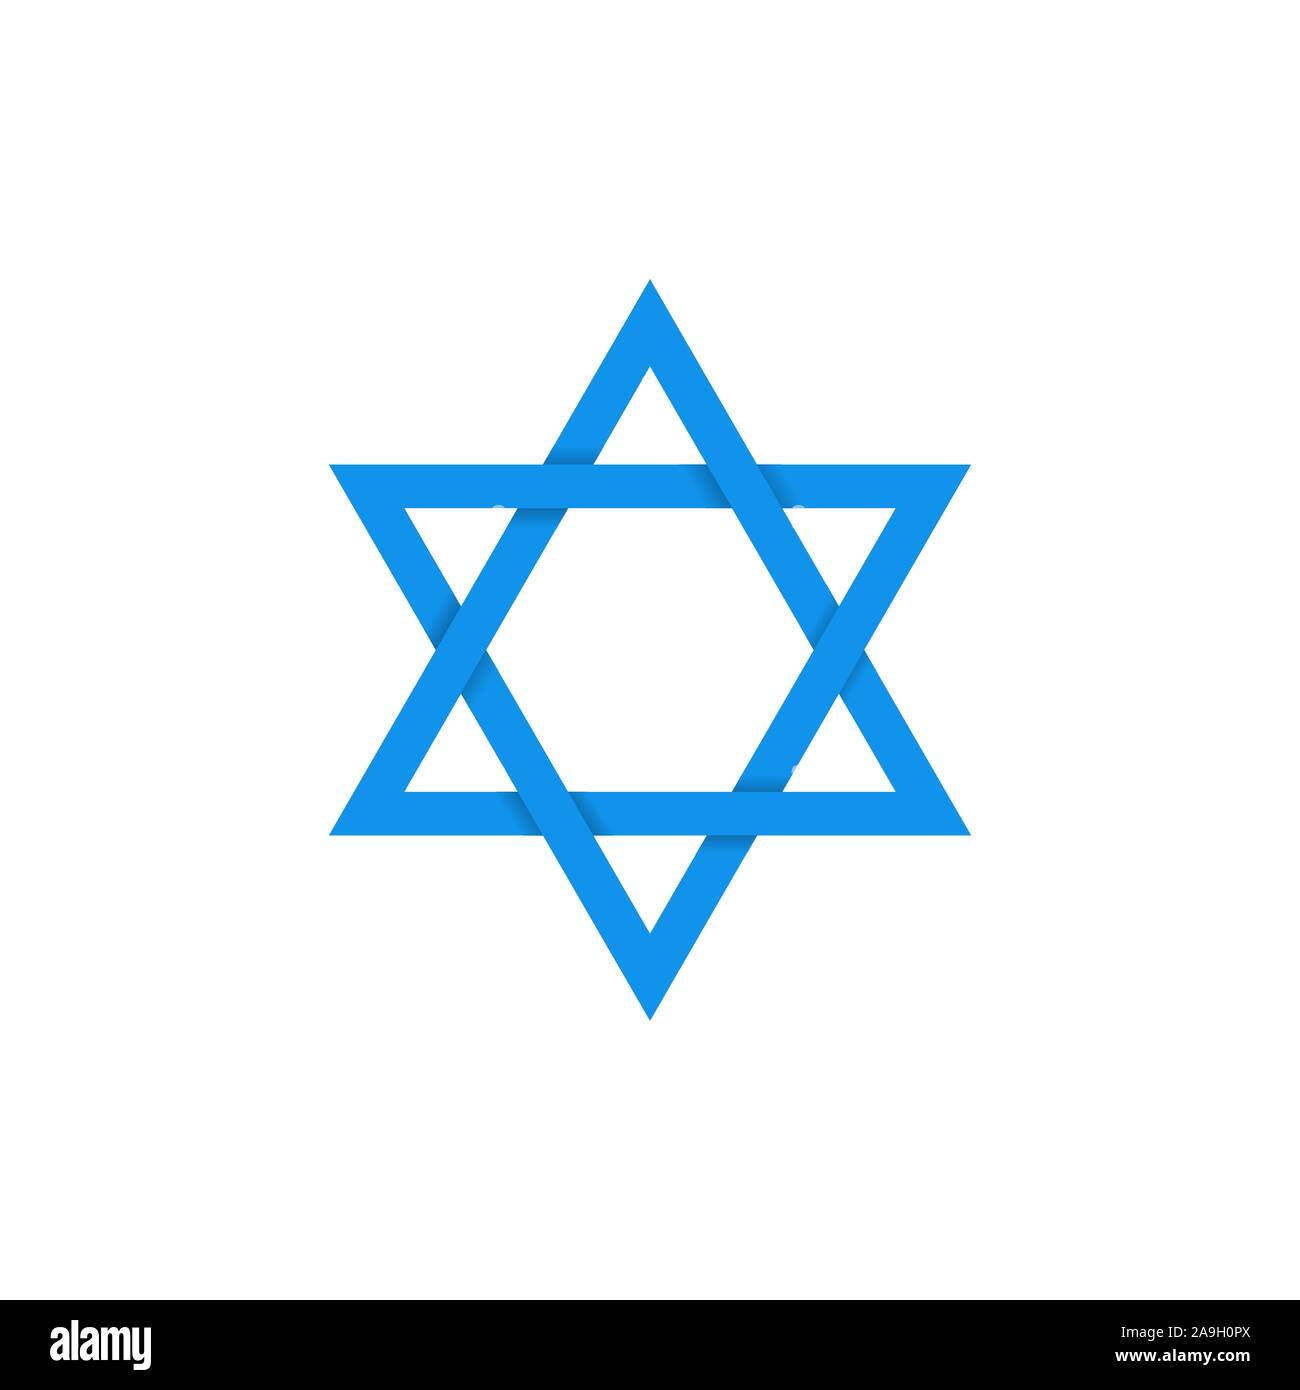 Blue Star of David icon. Generally recognized symbol of modern Jewish identity and Judaism, Israel symbol Stock Vector